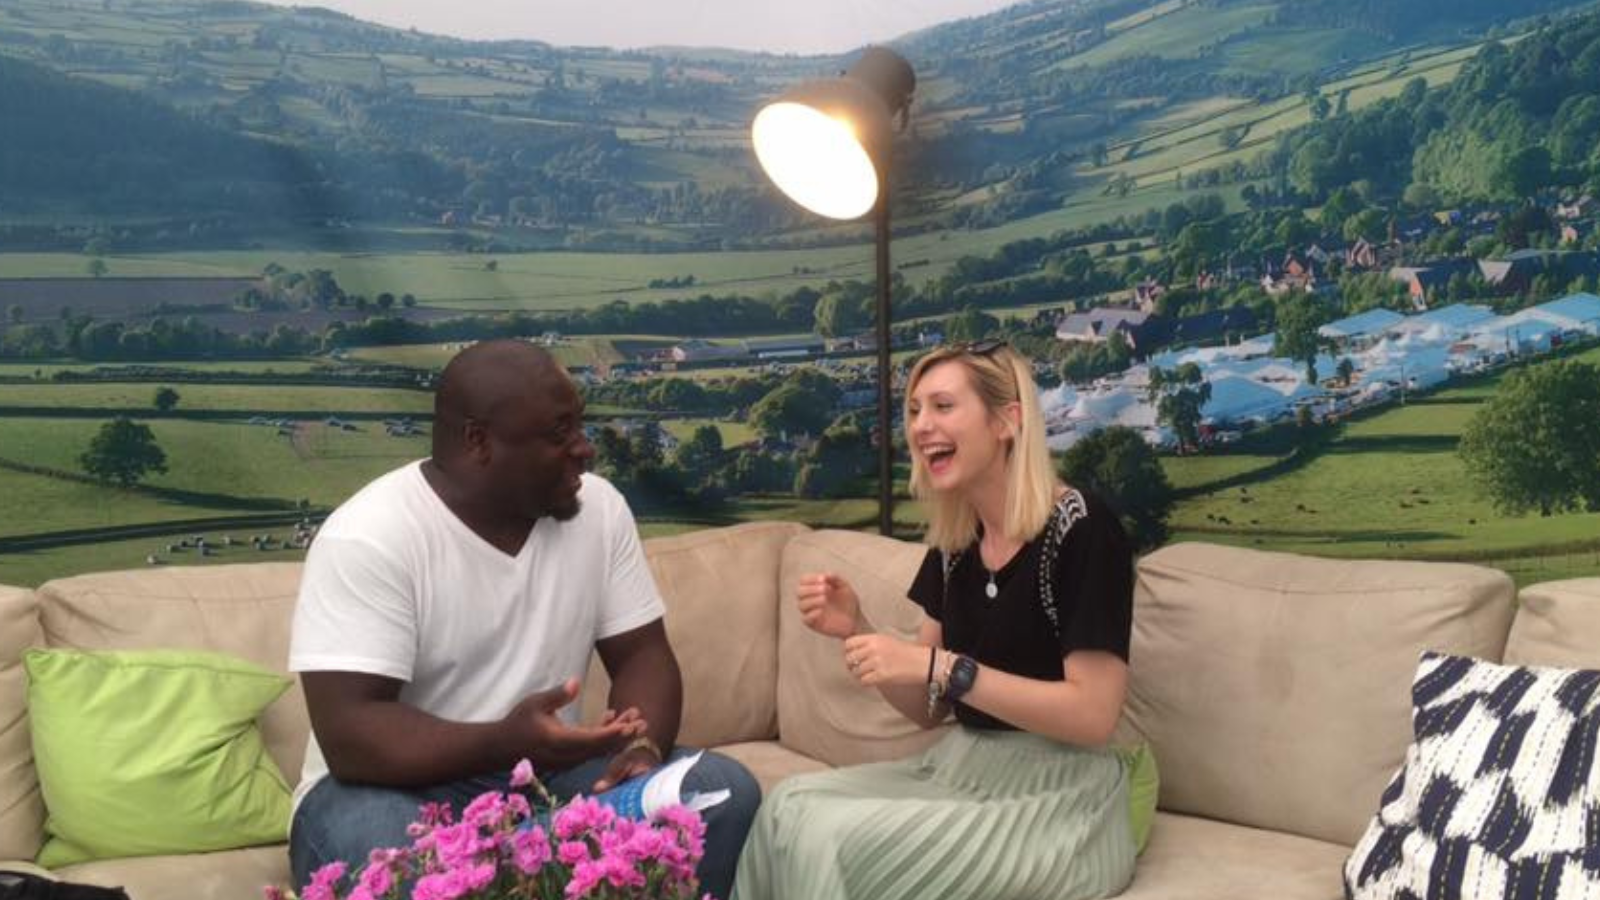 Carys with Eric at Hay Festival